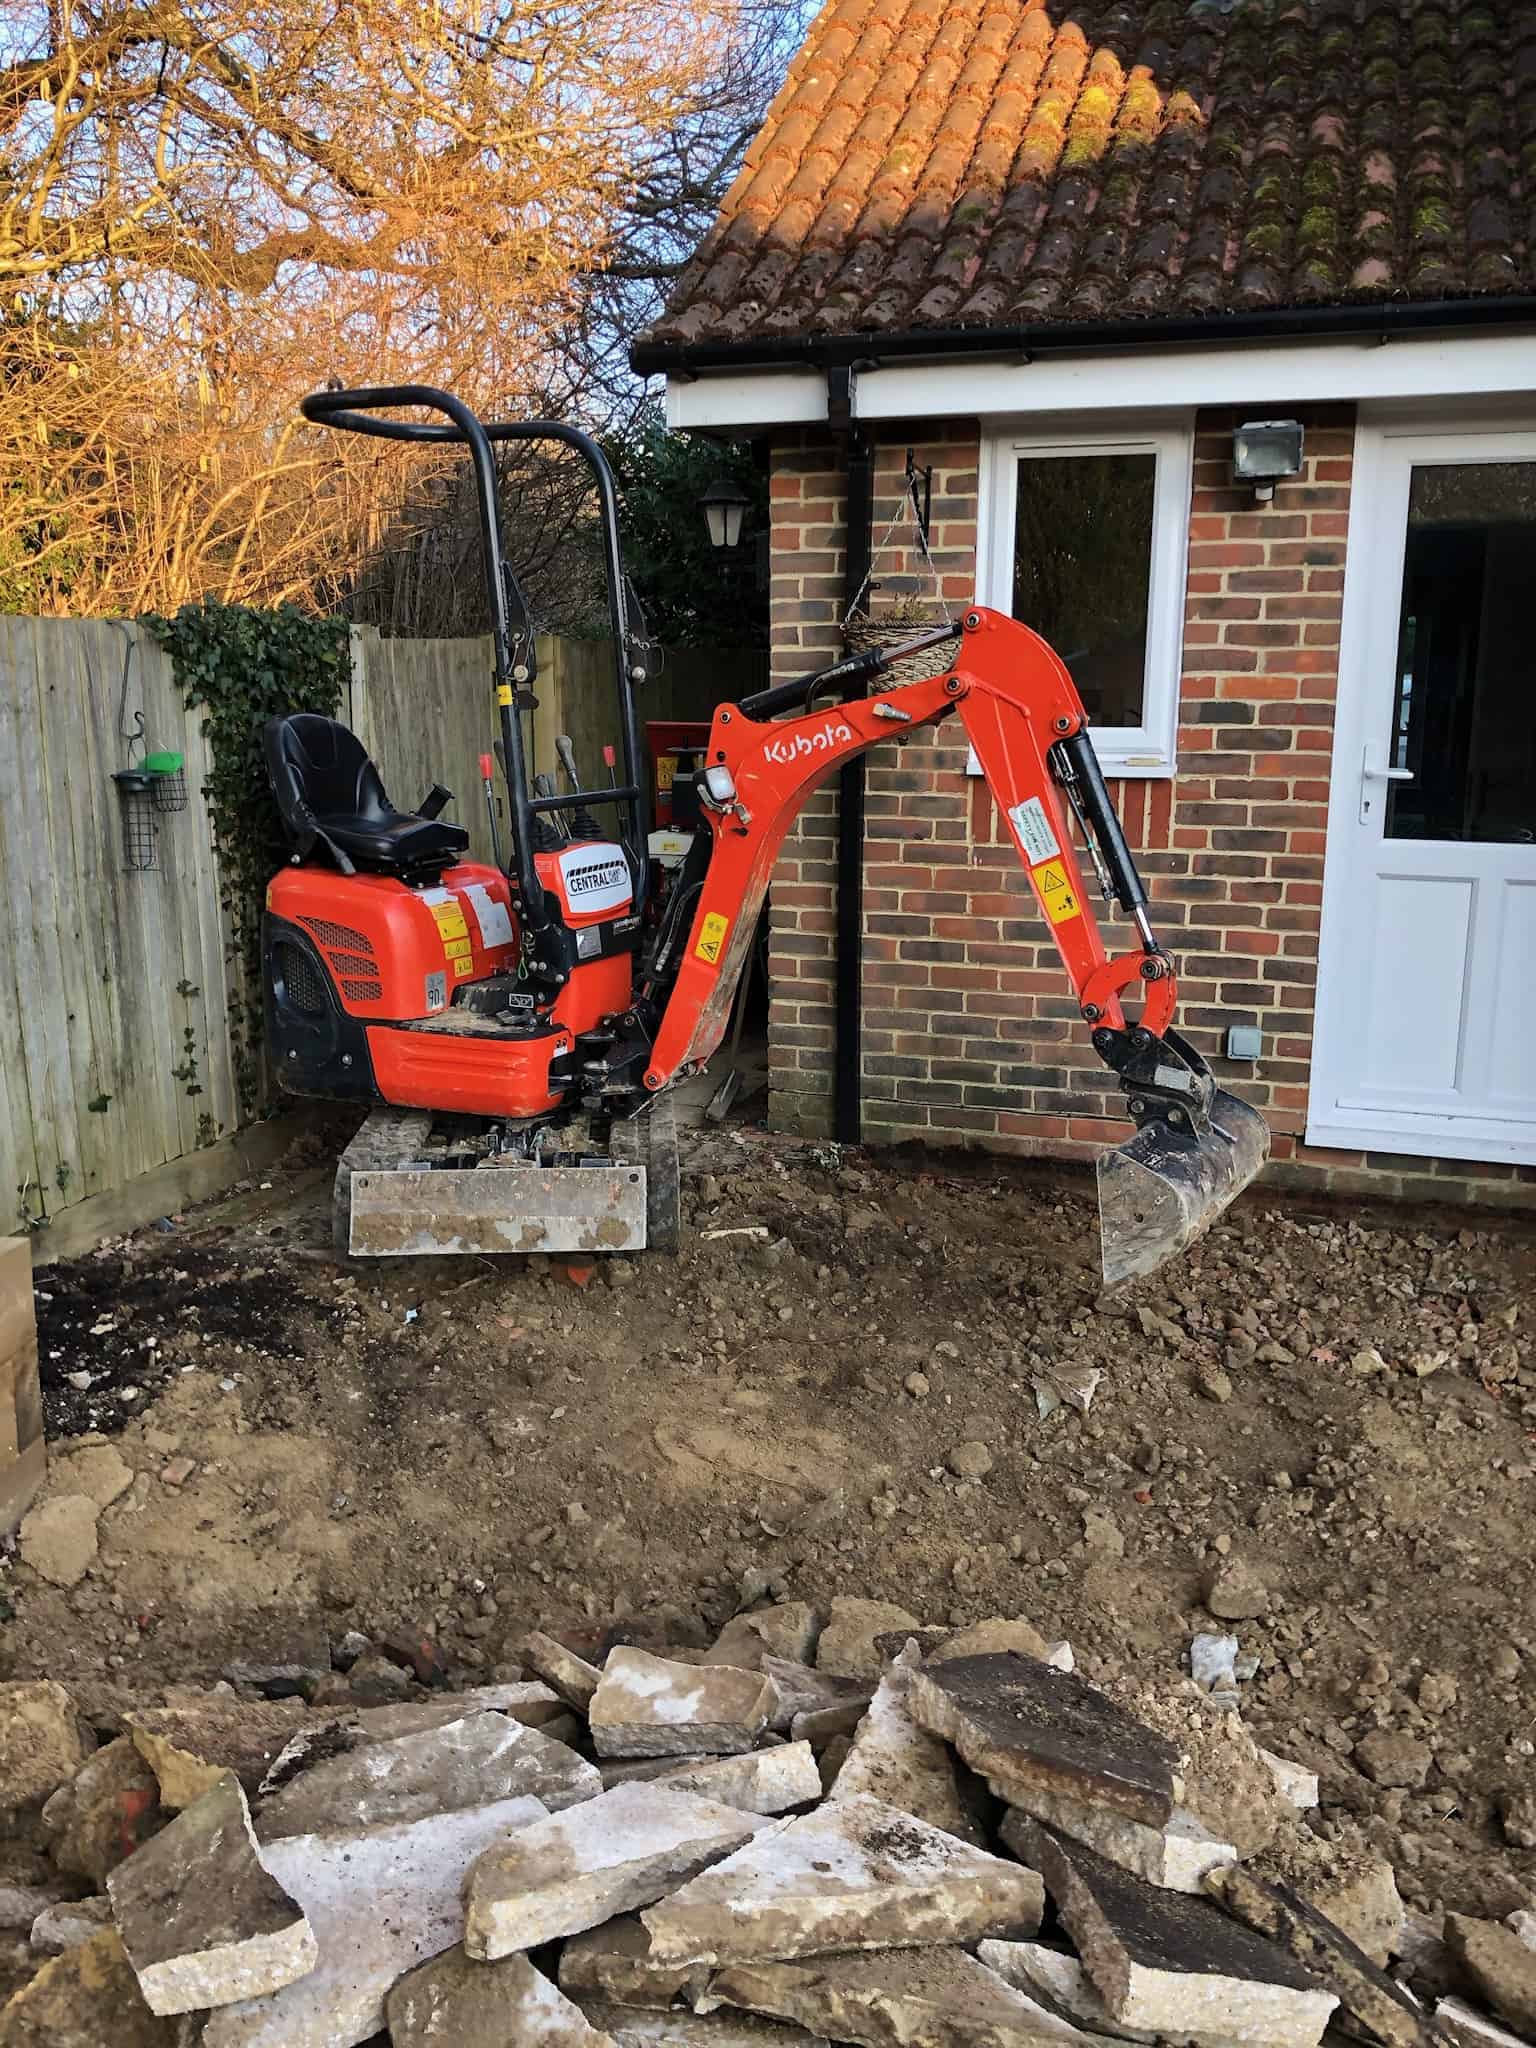 Which Digger Do I Need To Hire?